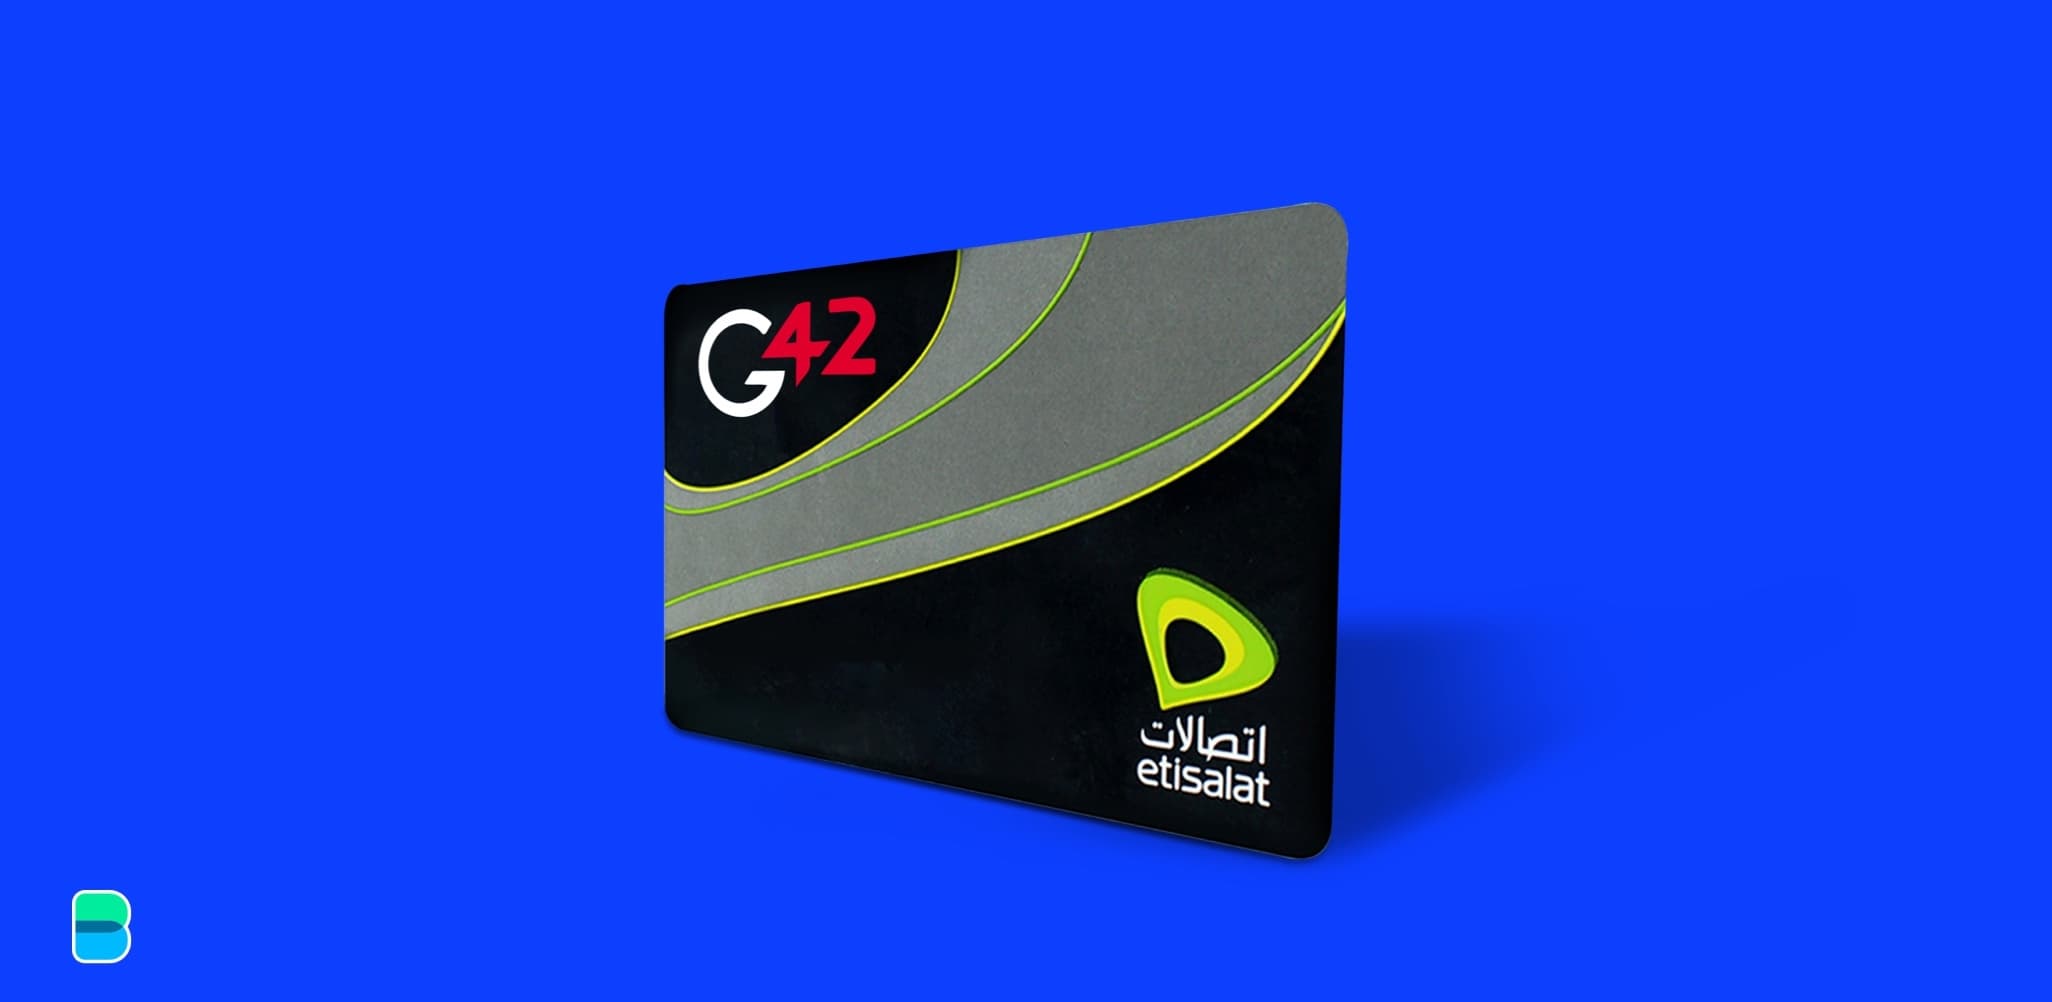 Etisalat and G42 have a thing for data